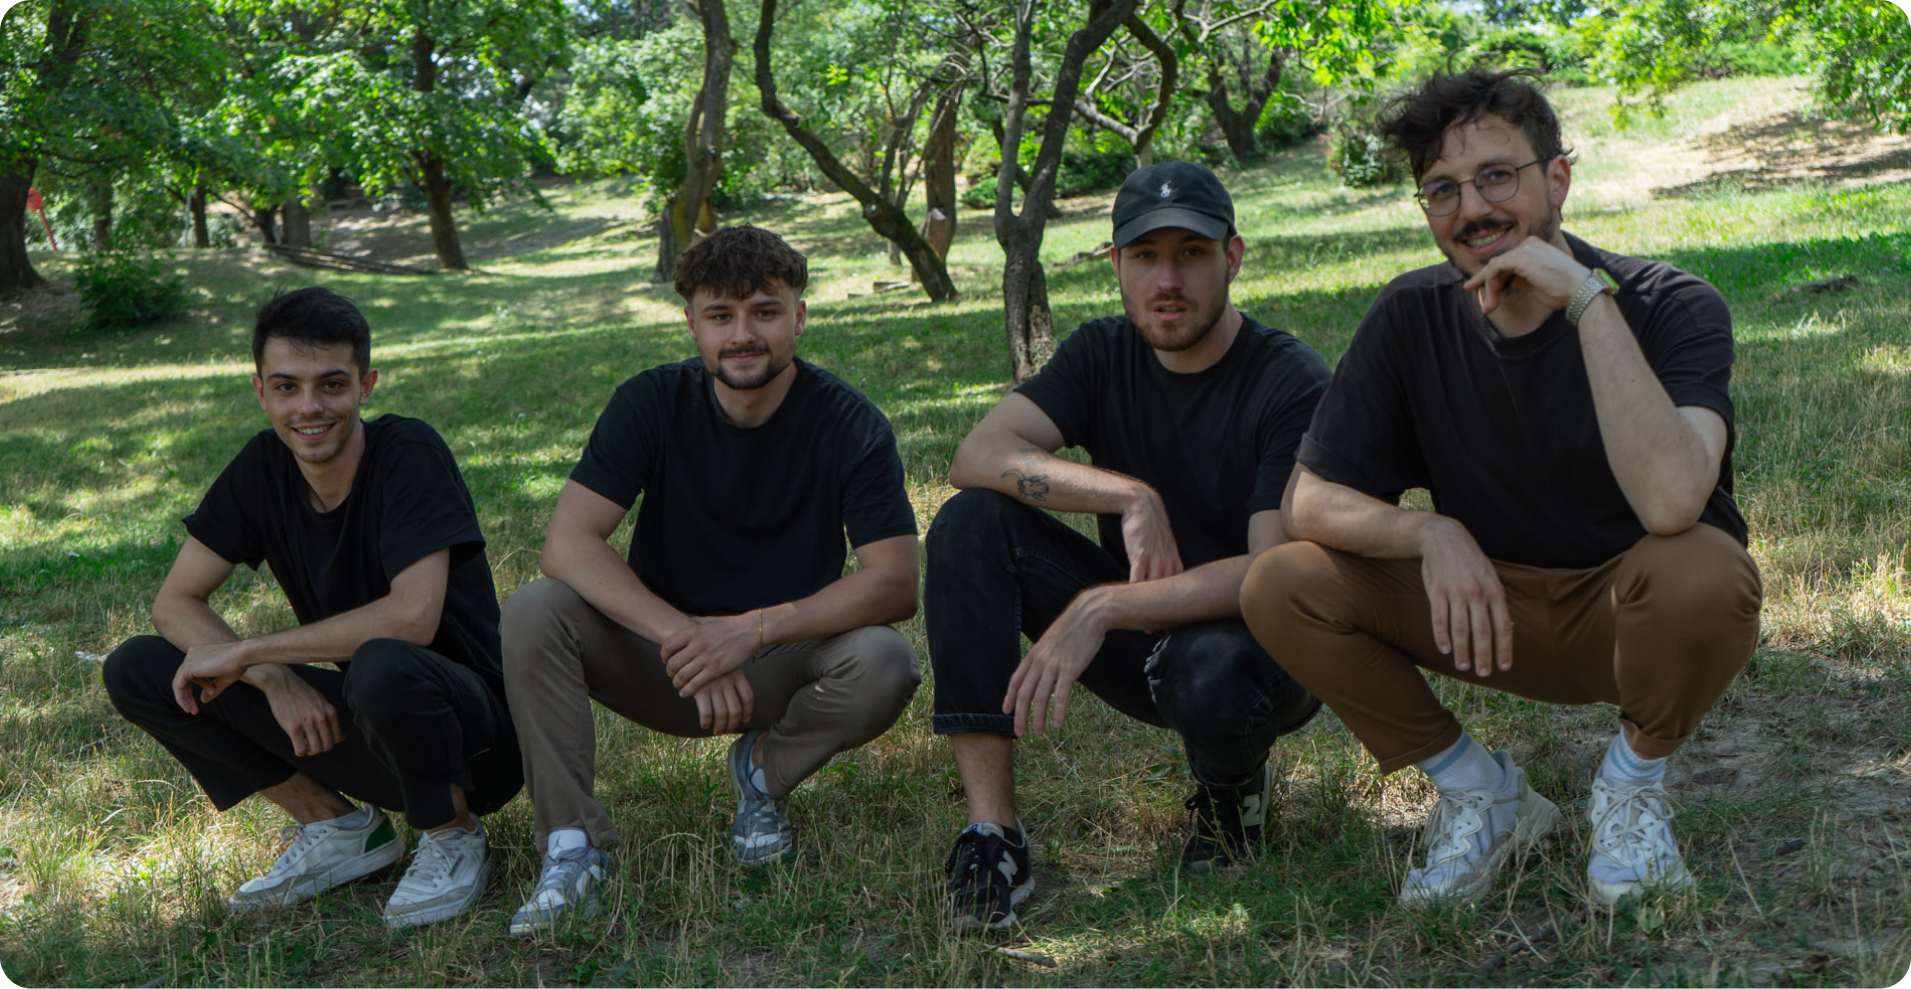 Four of the Once Advertisements employees, Matyas Laneury, Gergo Mezes, Krisztian Mezei, and Kristof Menesi sitting on the field at ‘Gellért Hill’ in Hungary.